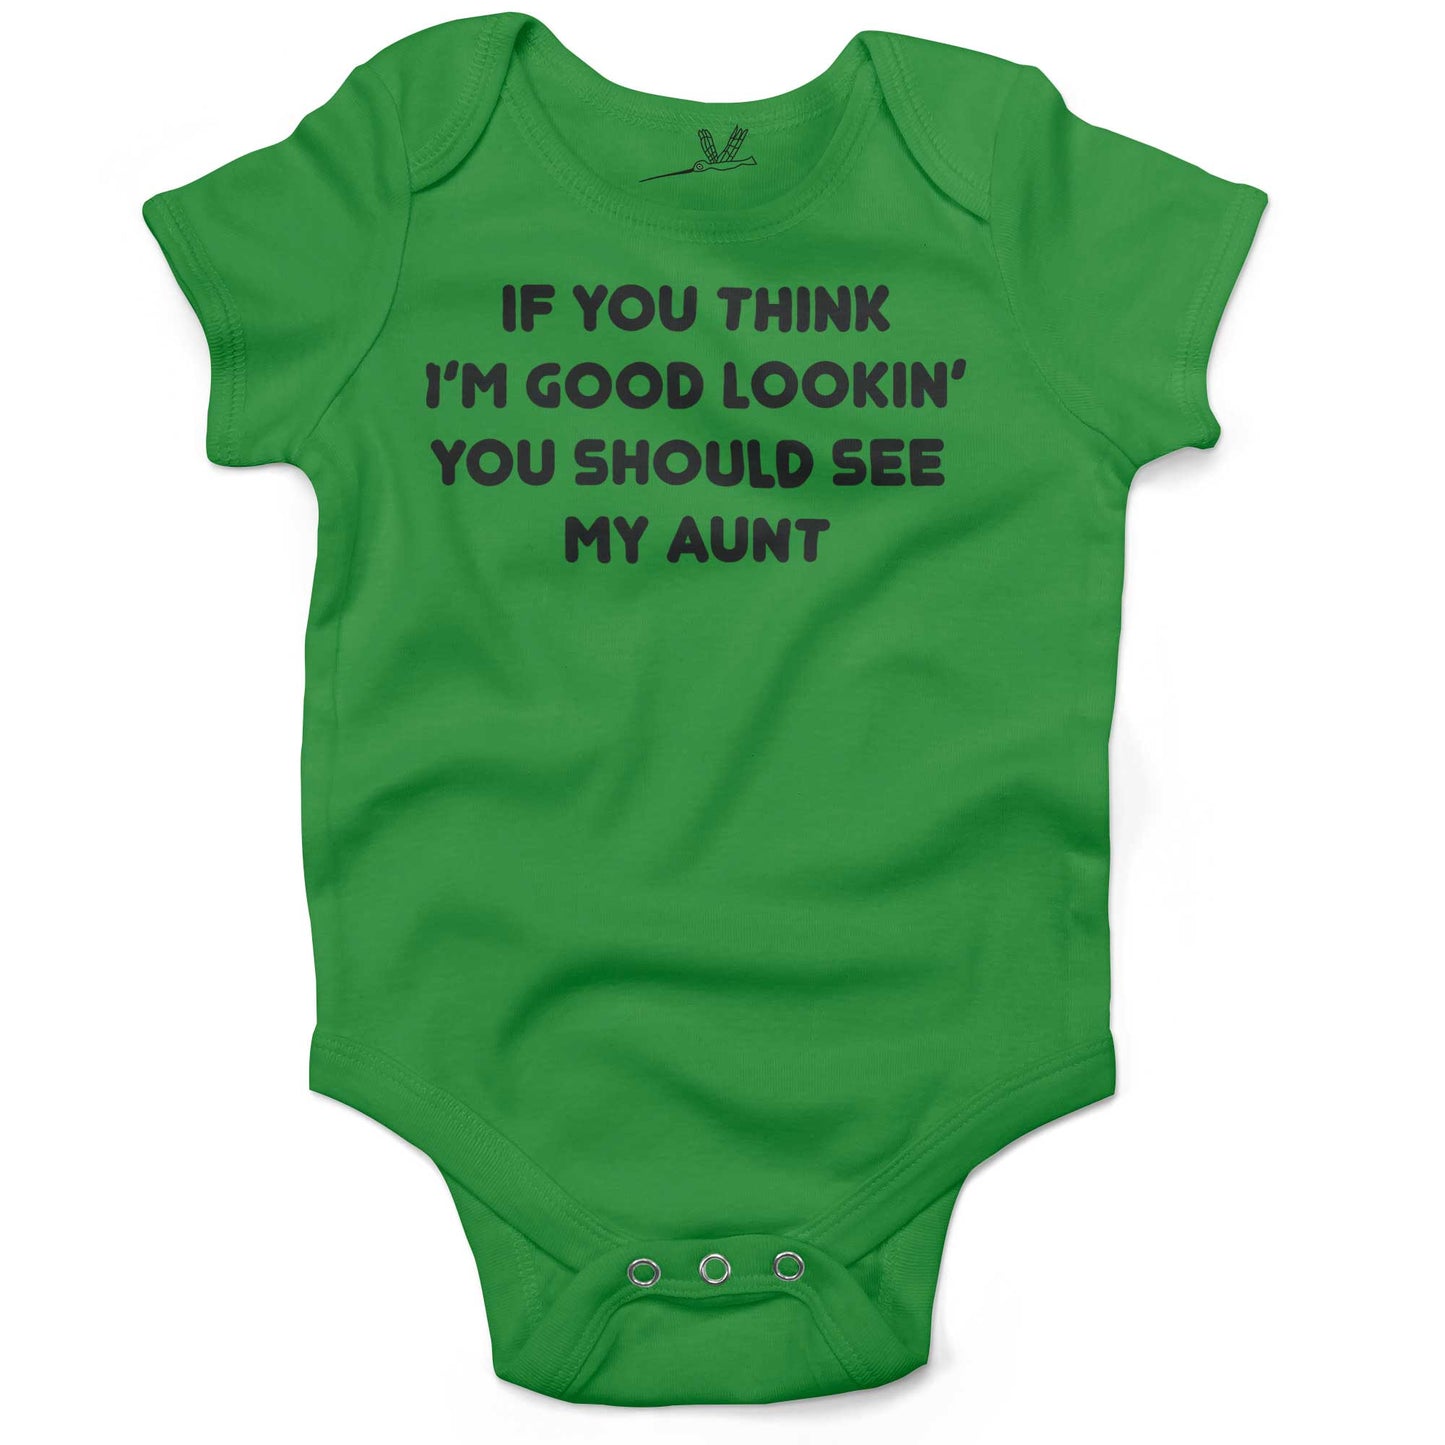 If You Think I'm Good Lookin' You Should See My Aunt Infant Bodysuit or Raglan Tee-Grass Green-3-6 months